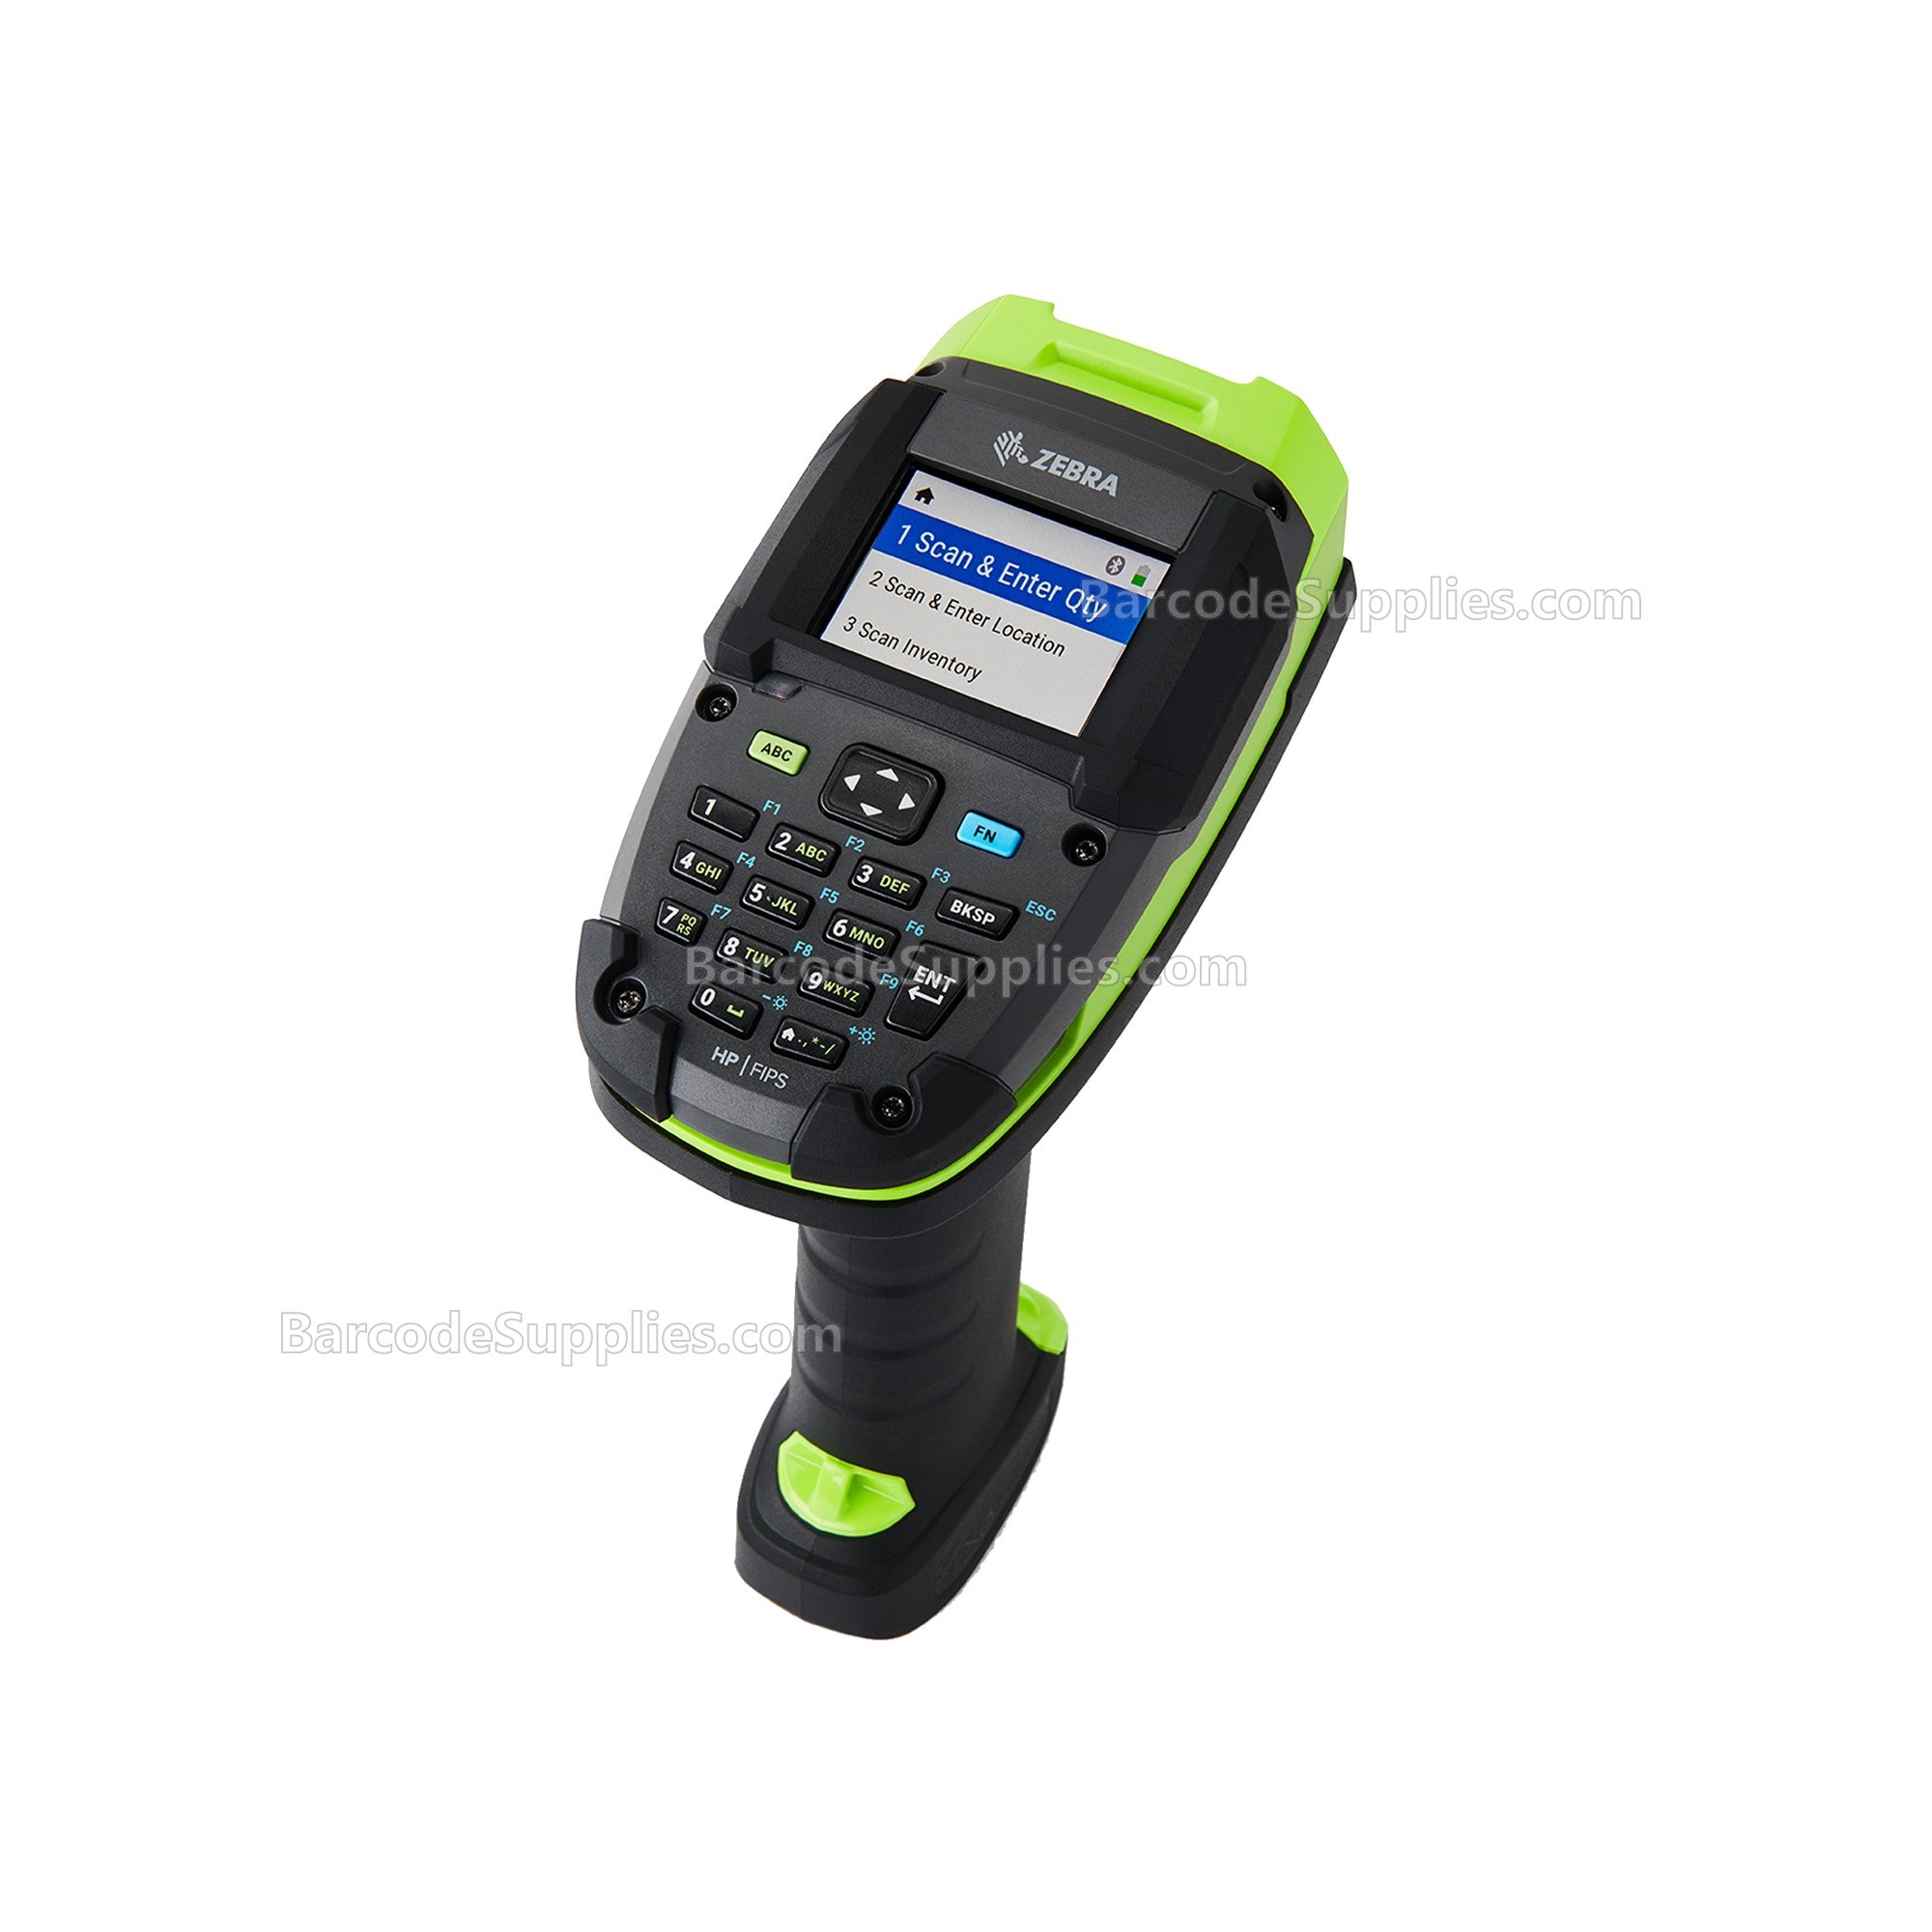 Zebra DS3678: Keypad and Display, Rugged, Area Imager, High Performance, Cordless, FIPS, Industrial Green, Vibration